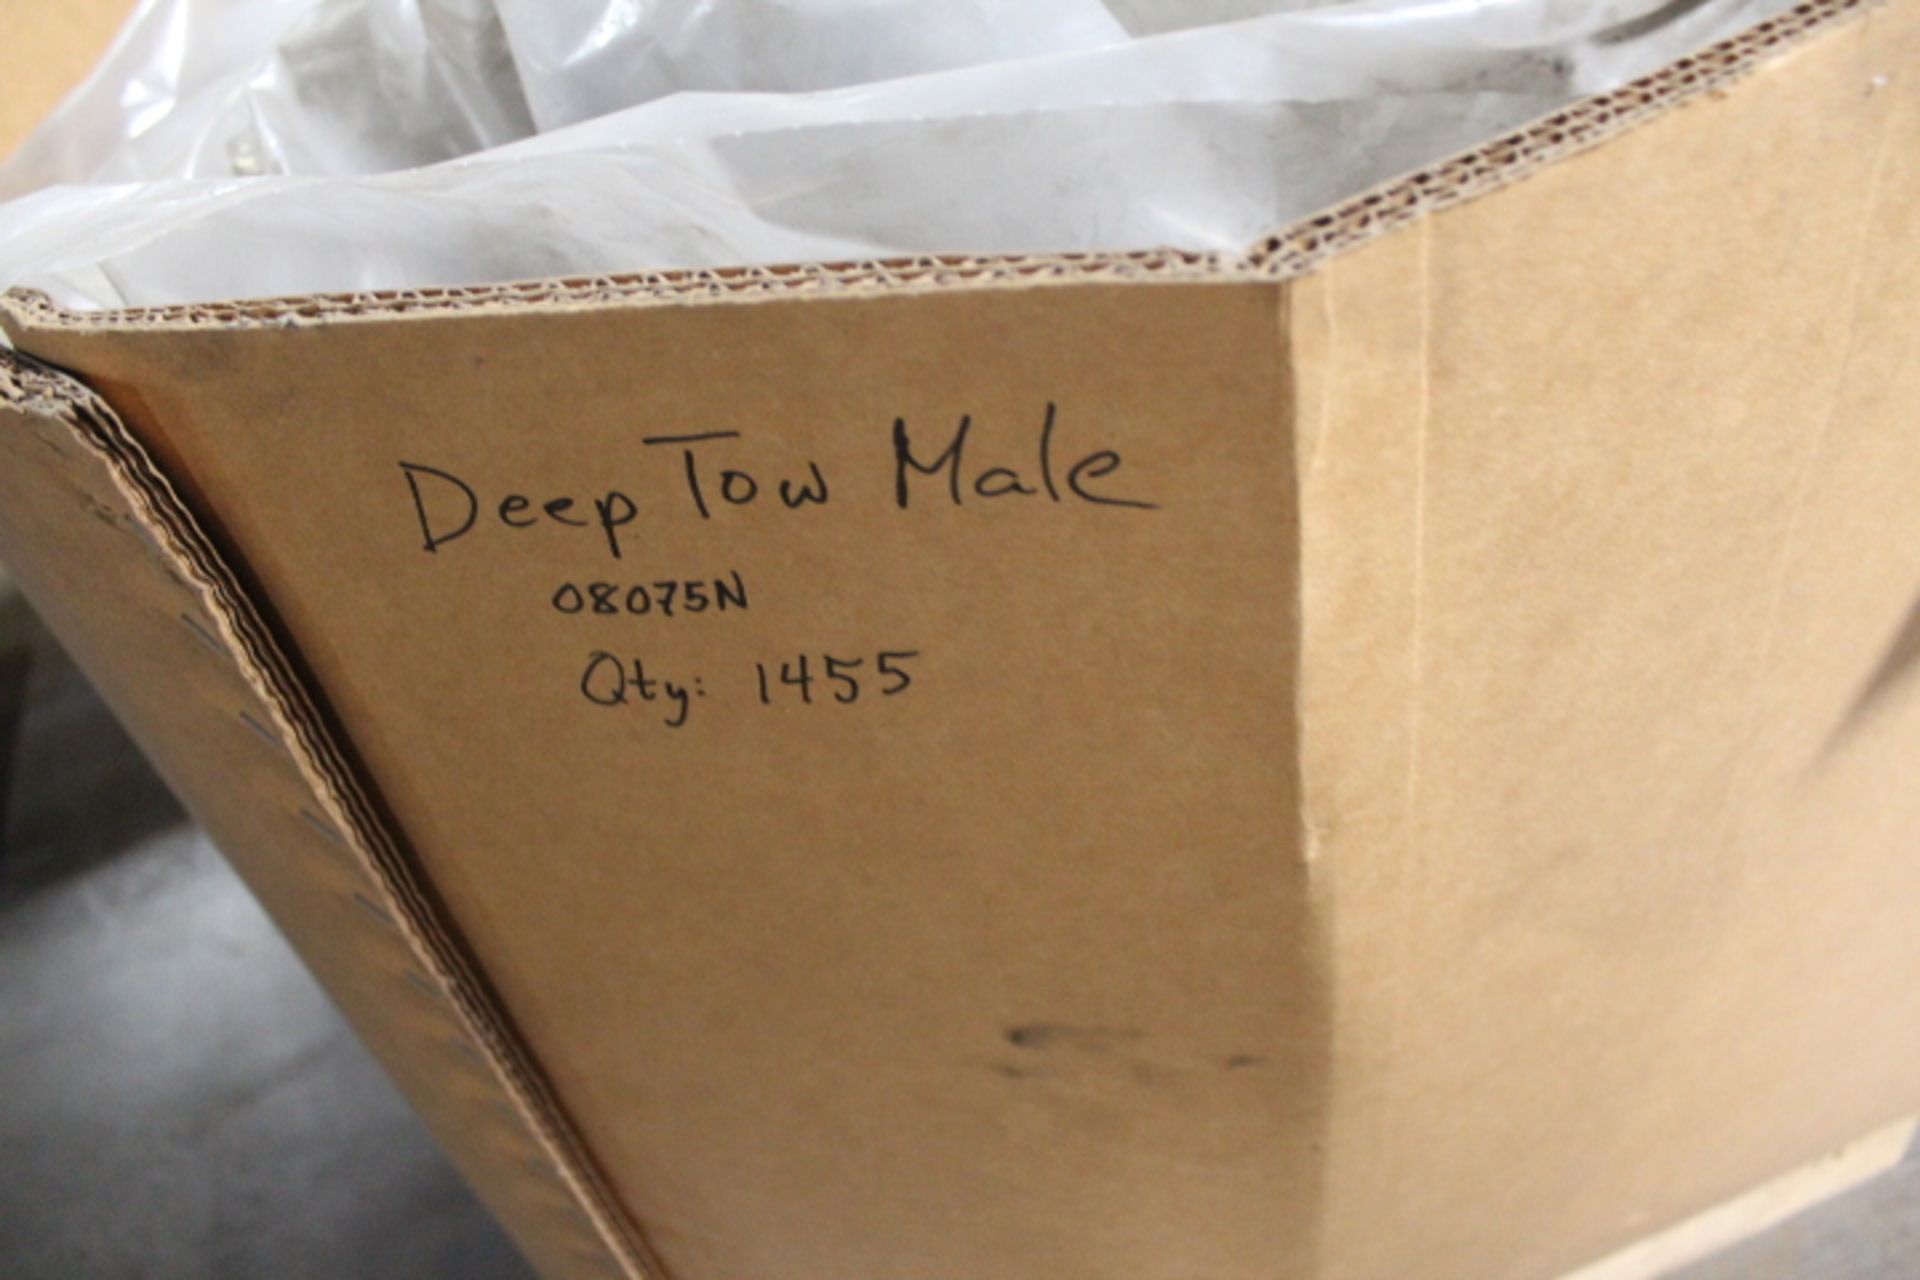 LOT, SKID OF DEEP TOW MALES (APRX 1300PCS) - Image 4 of 5